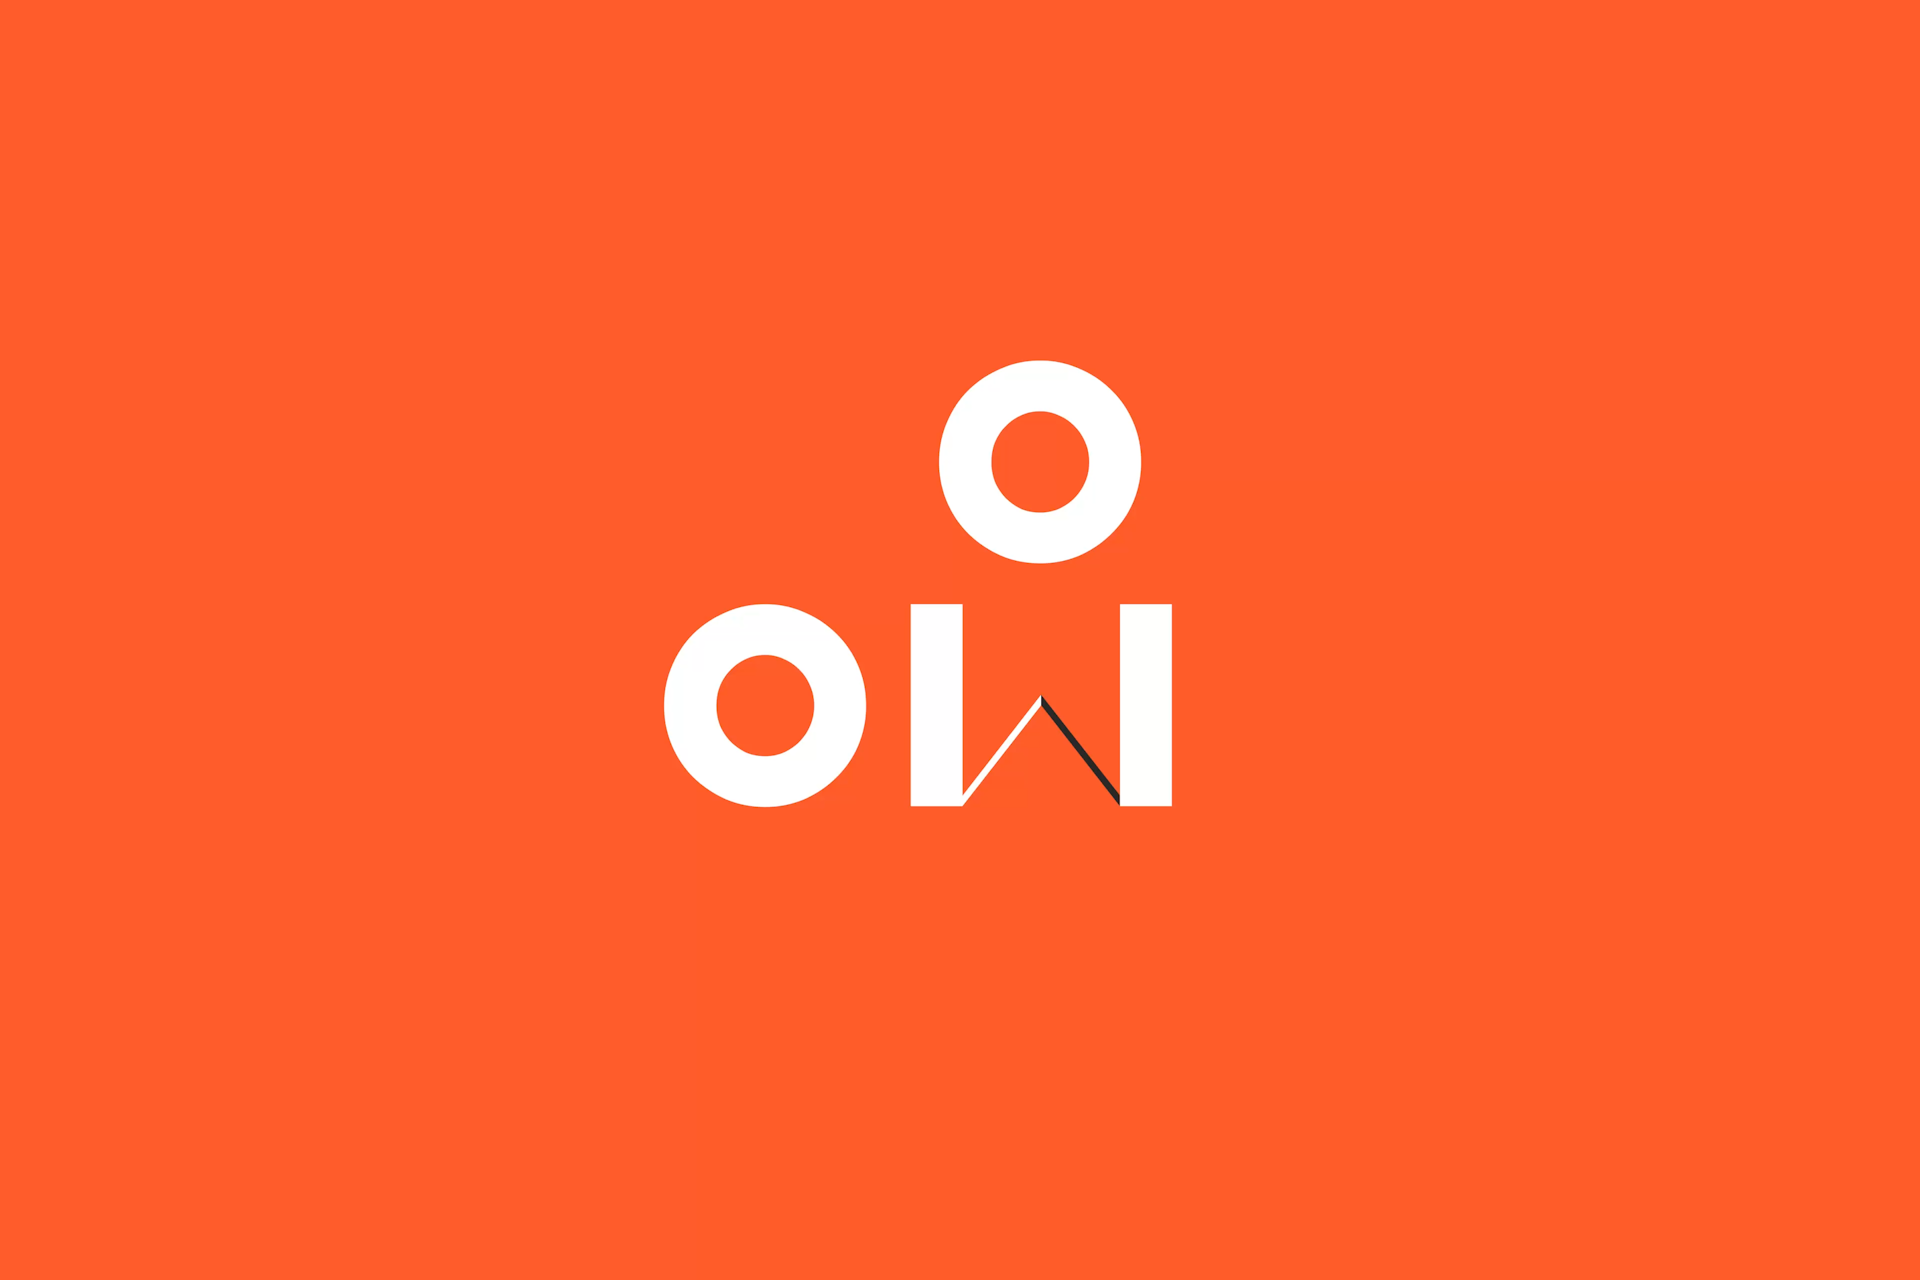 The Only on Wednesdays logo, featuring the letters O and O arranged around the letter W as if hands on a clockface, in white on an orange background